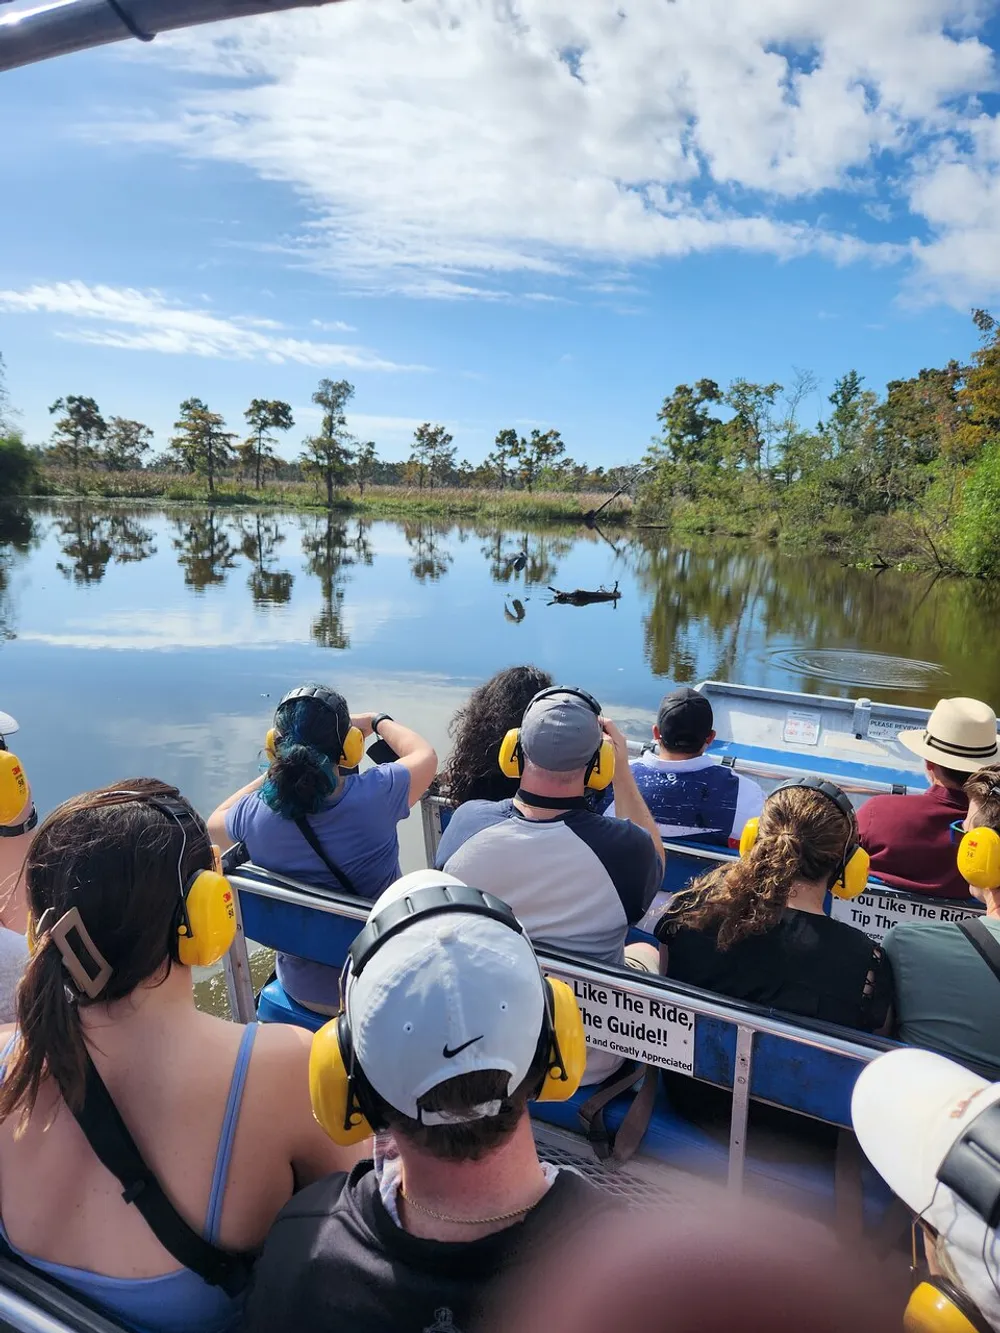 Passengers wearing protective ear gear are on a boat tour likely an airboat ride enjoying the tranquil waters and scenic view of a natural landscape possibly a swamp or wetland area